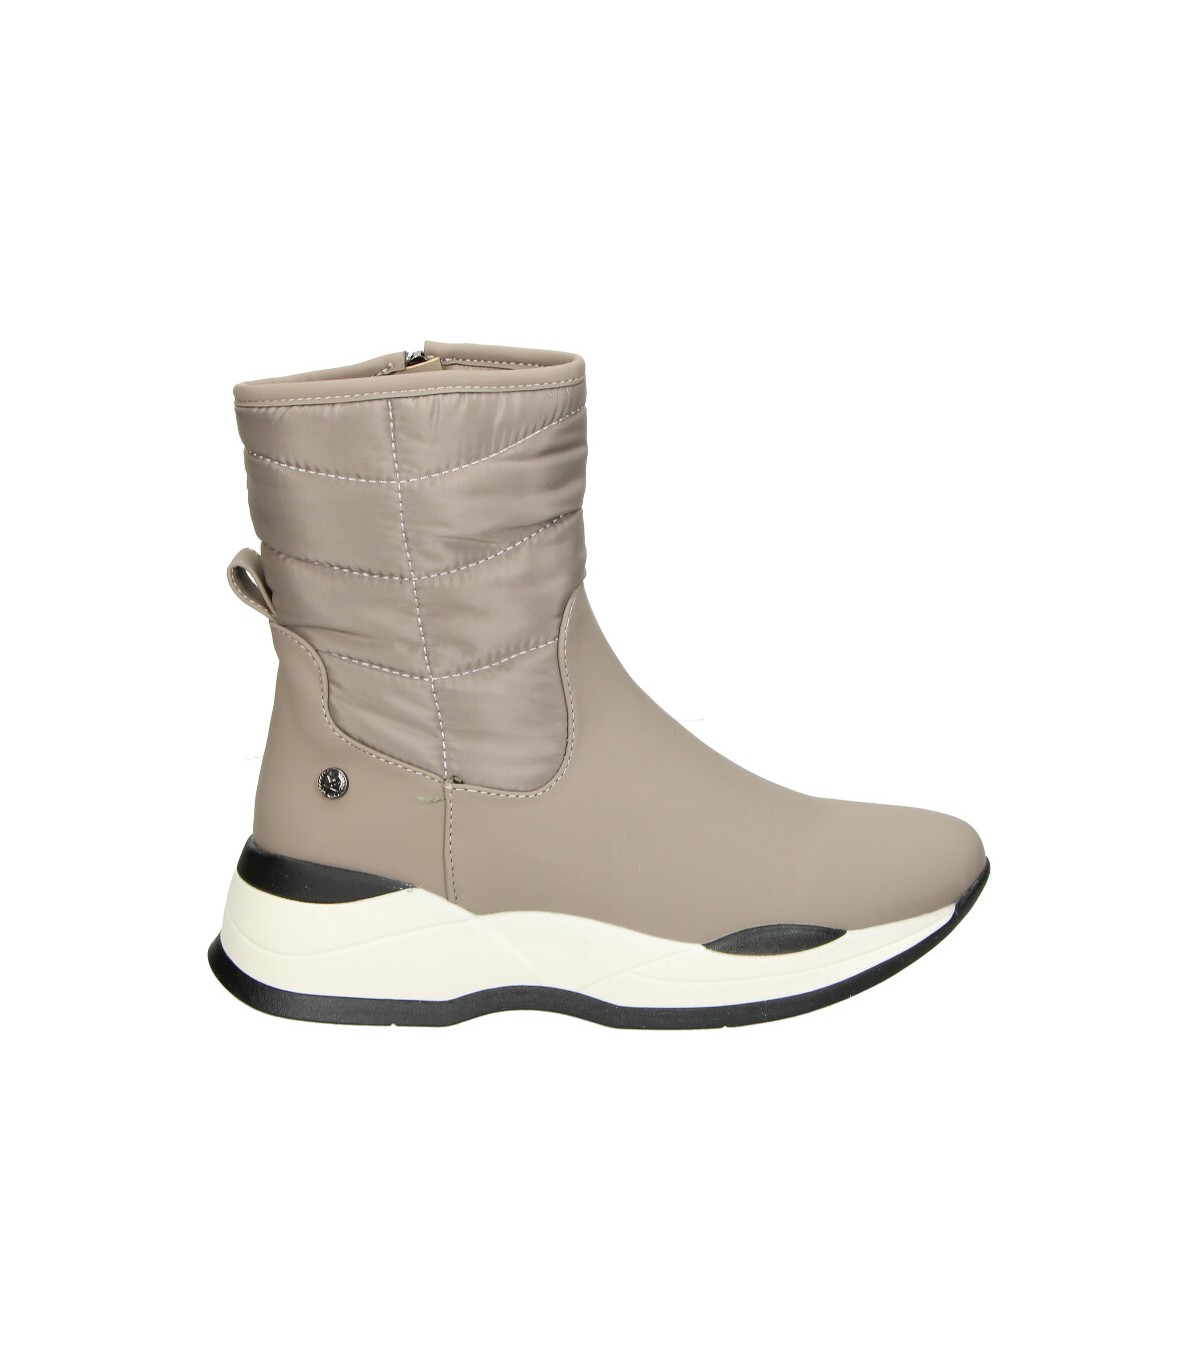 Botines casual de mujer XTI color taupe